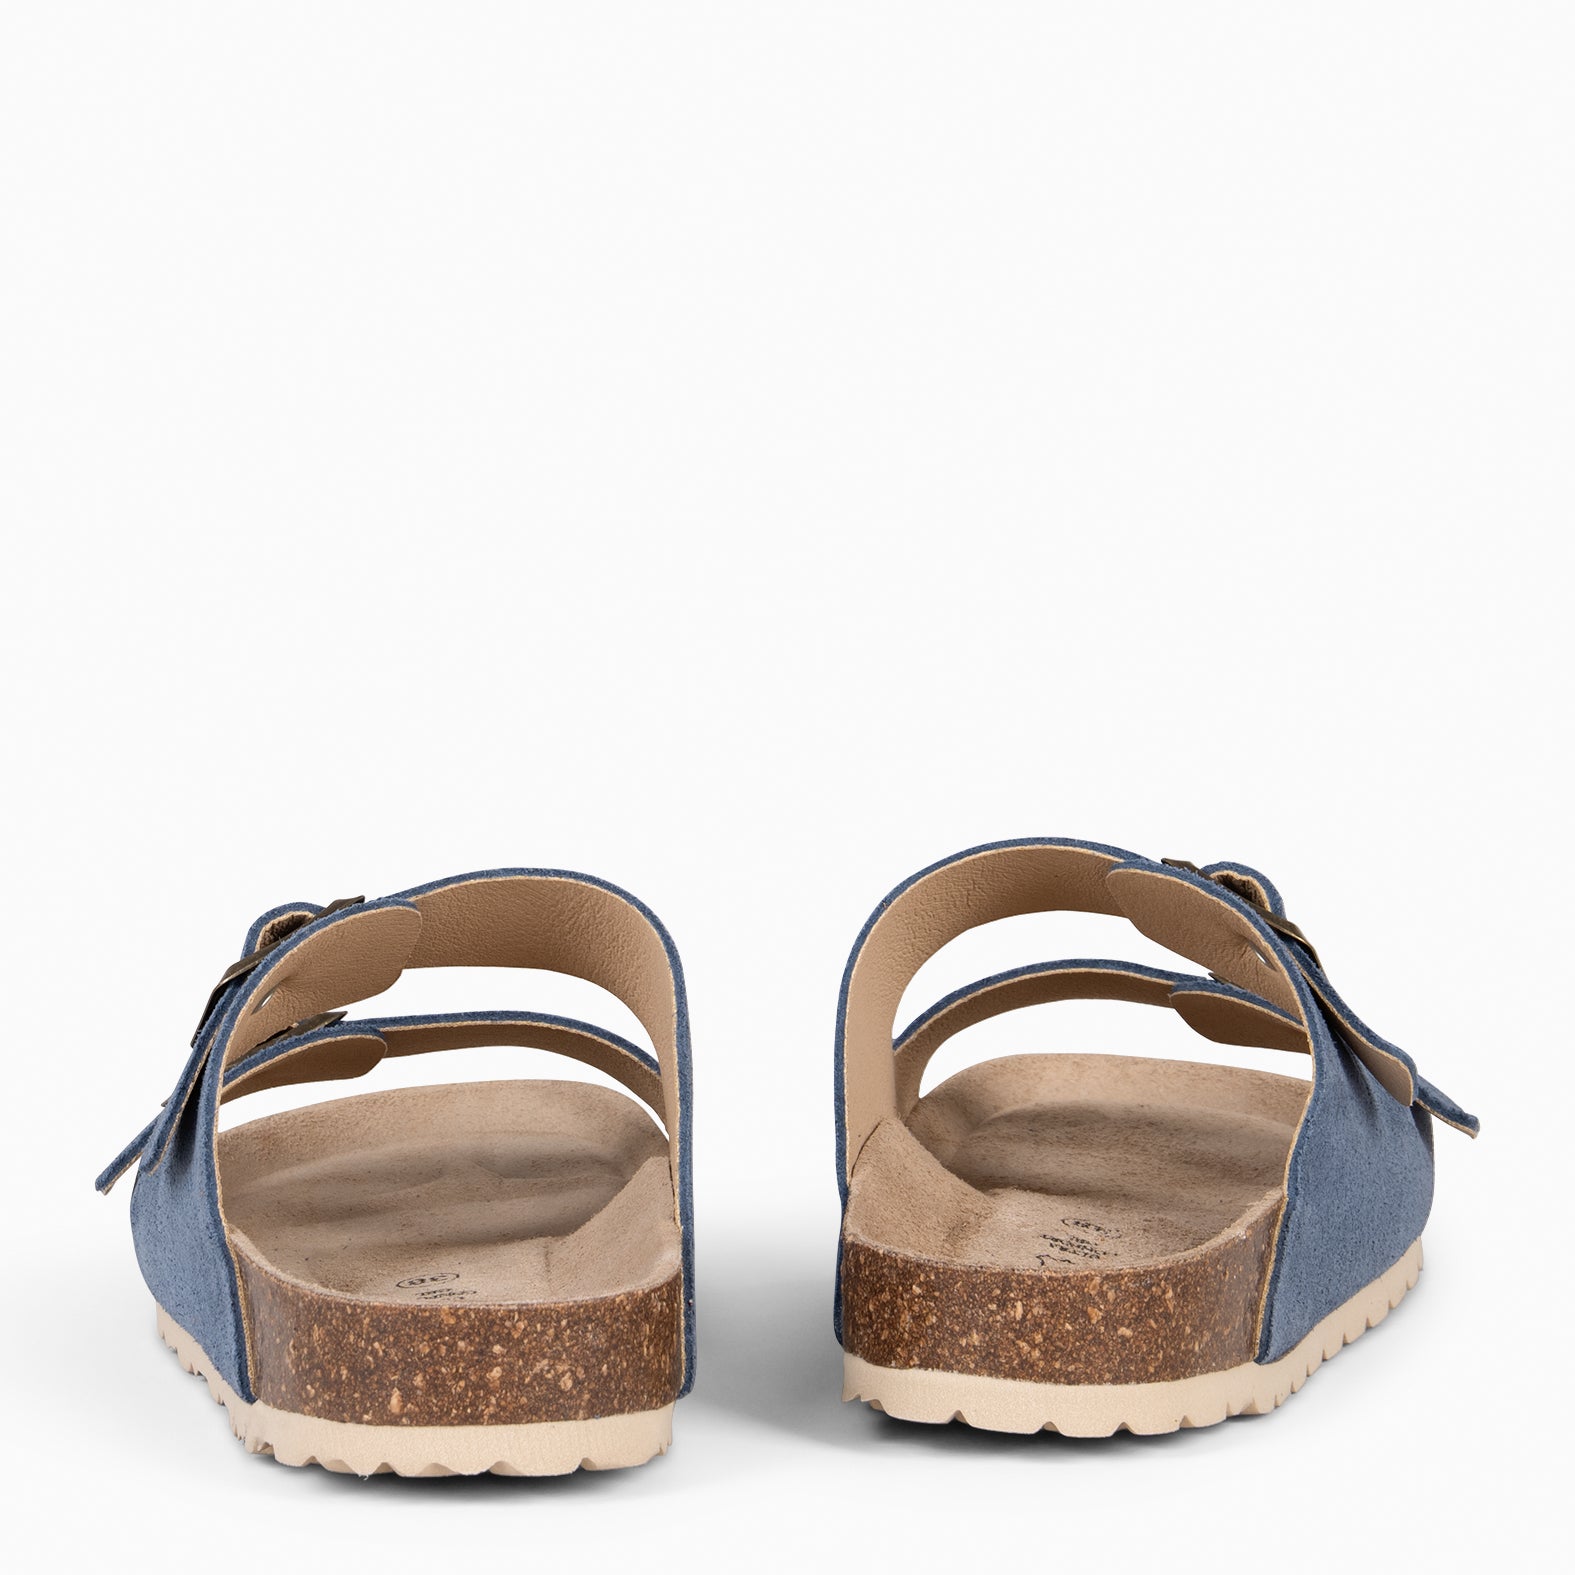 BORA - JEANS Flat sandal with double buckle